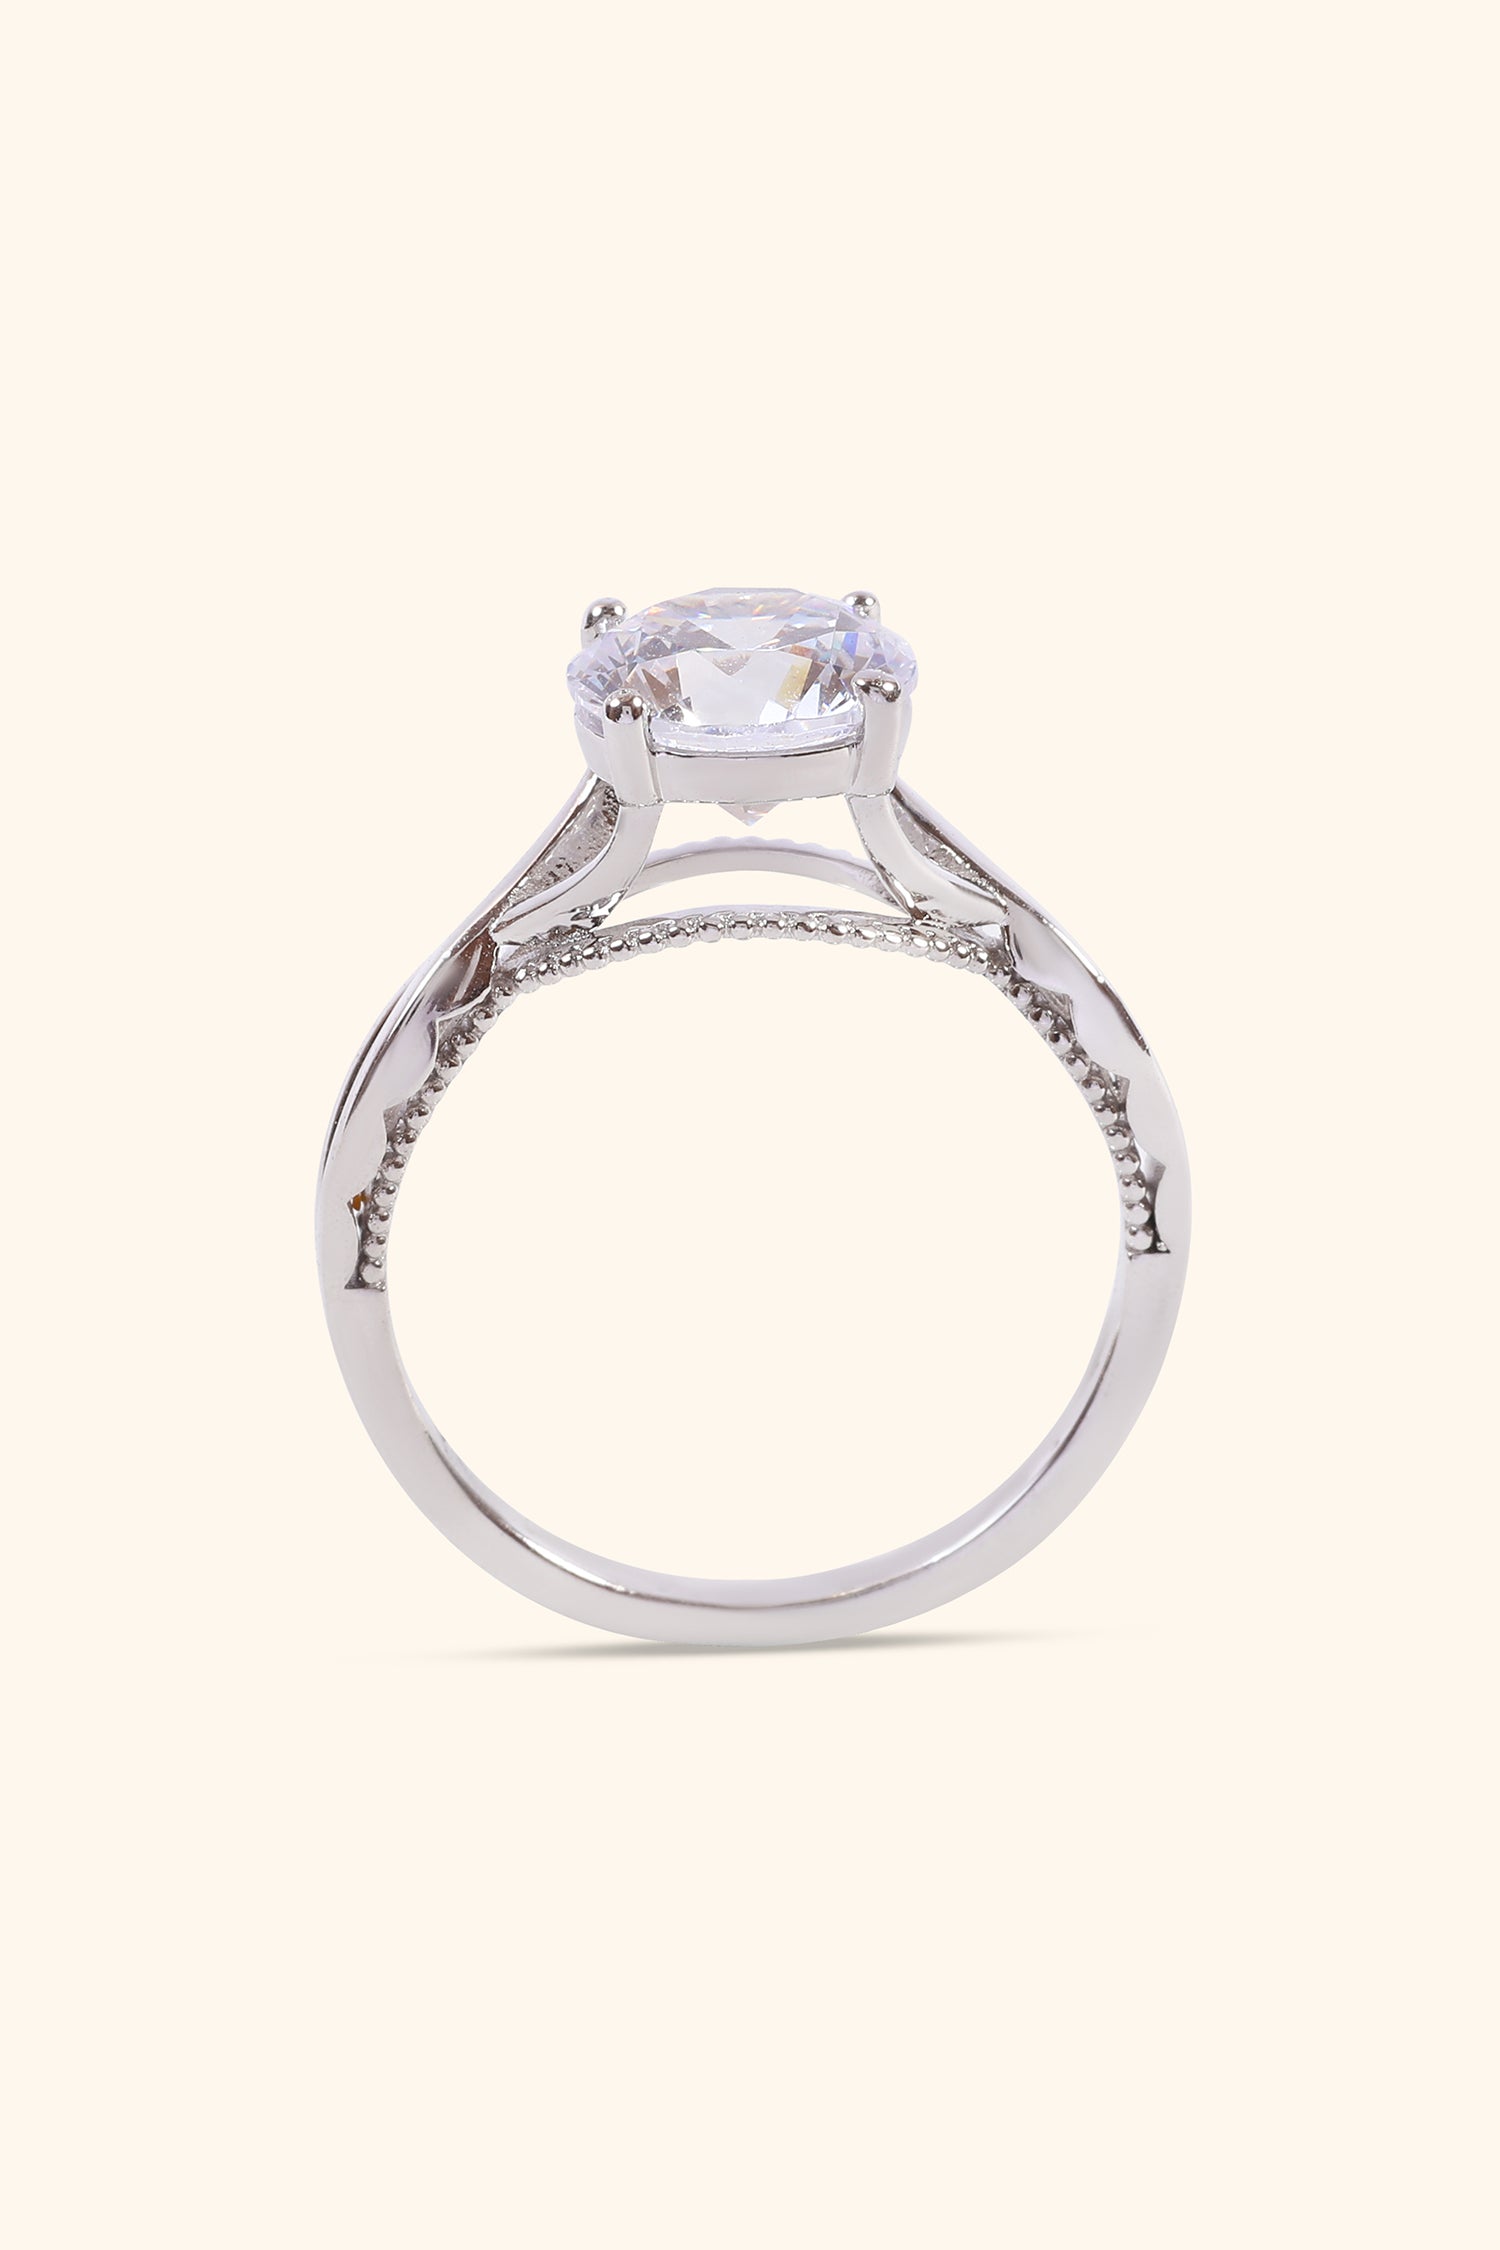 Sirena Ring with Round Brilliant Solitaire